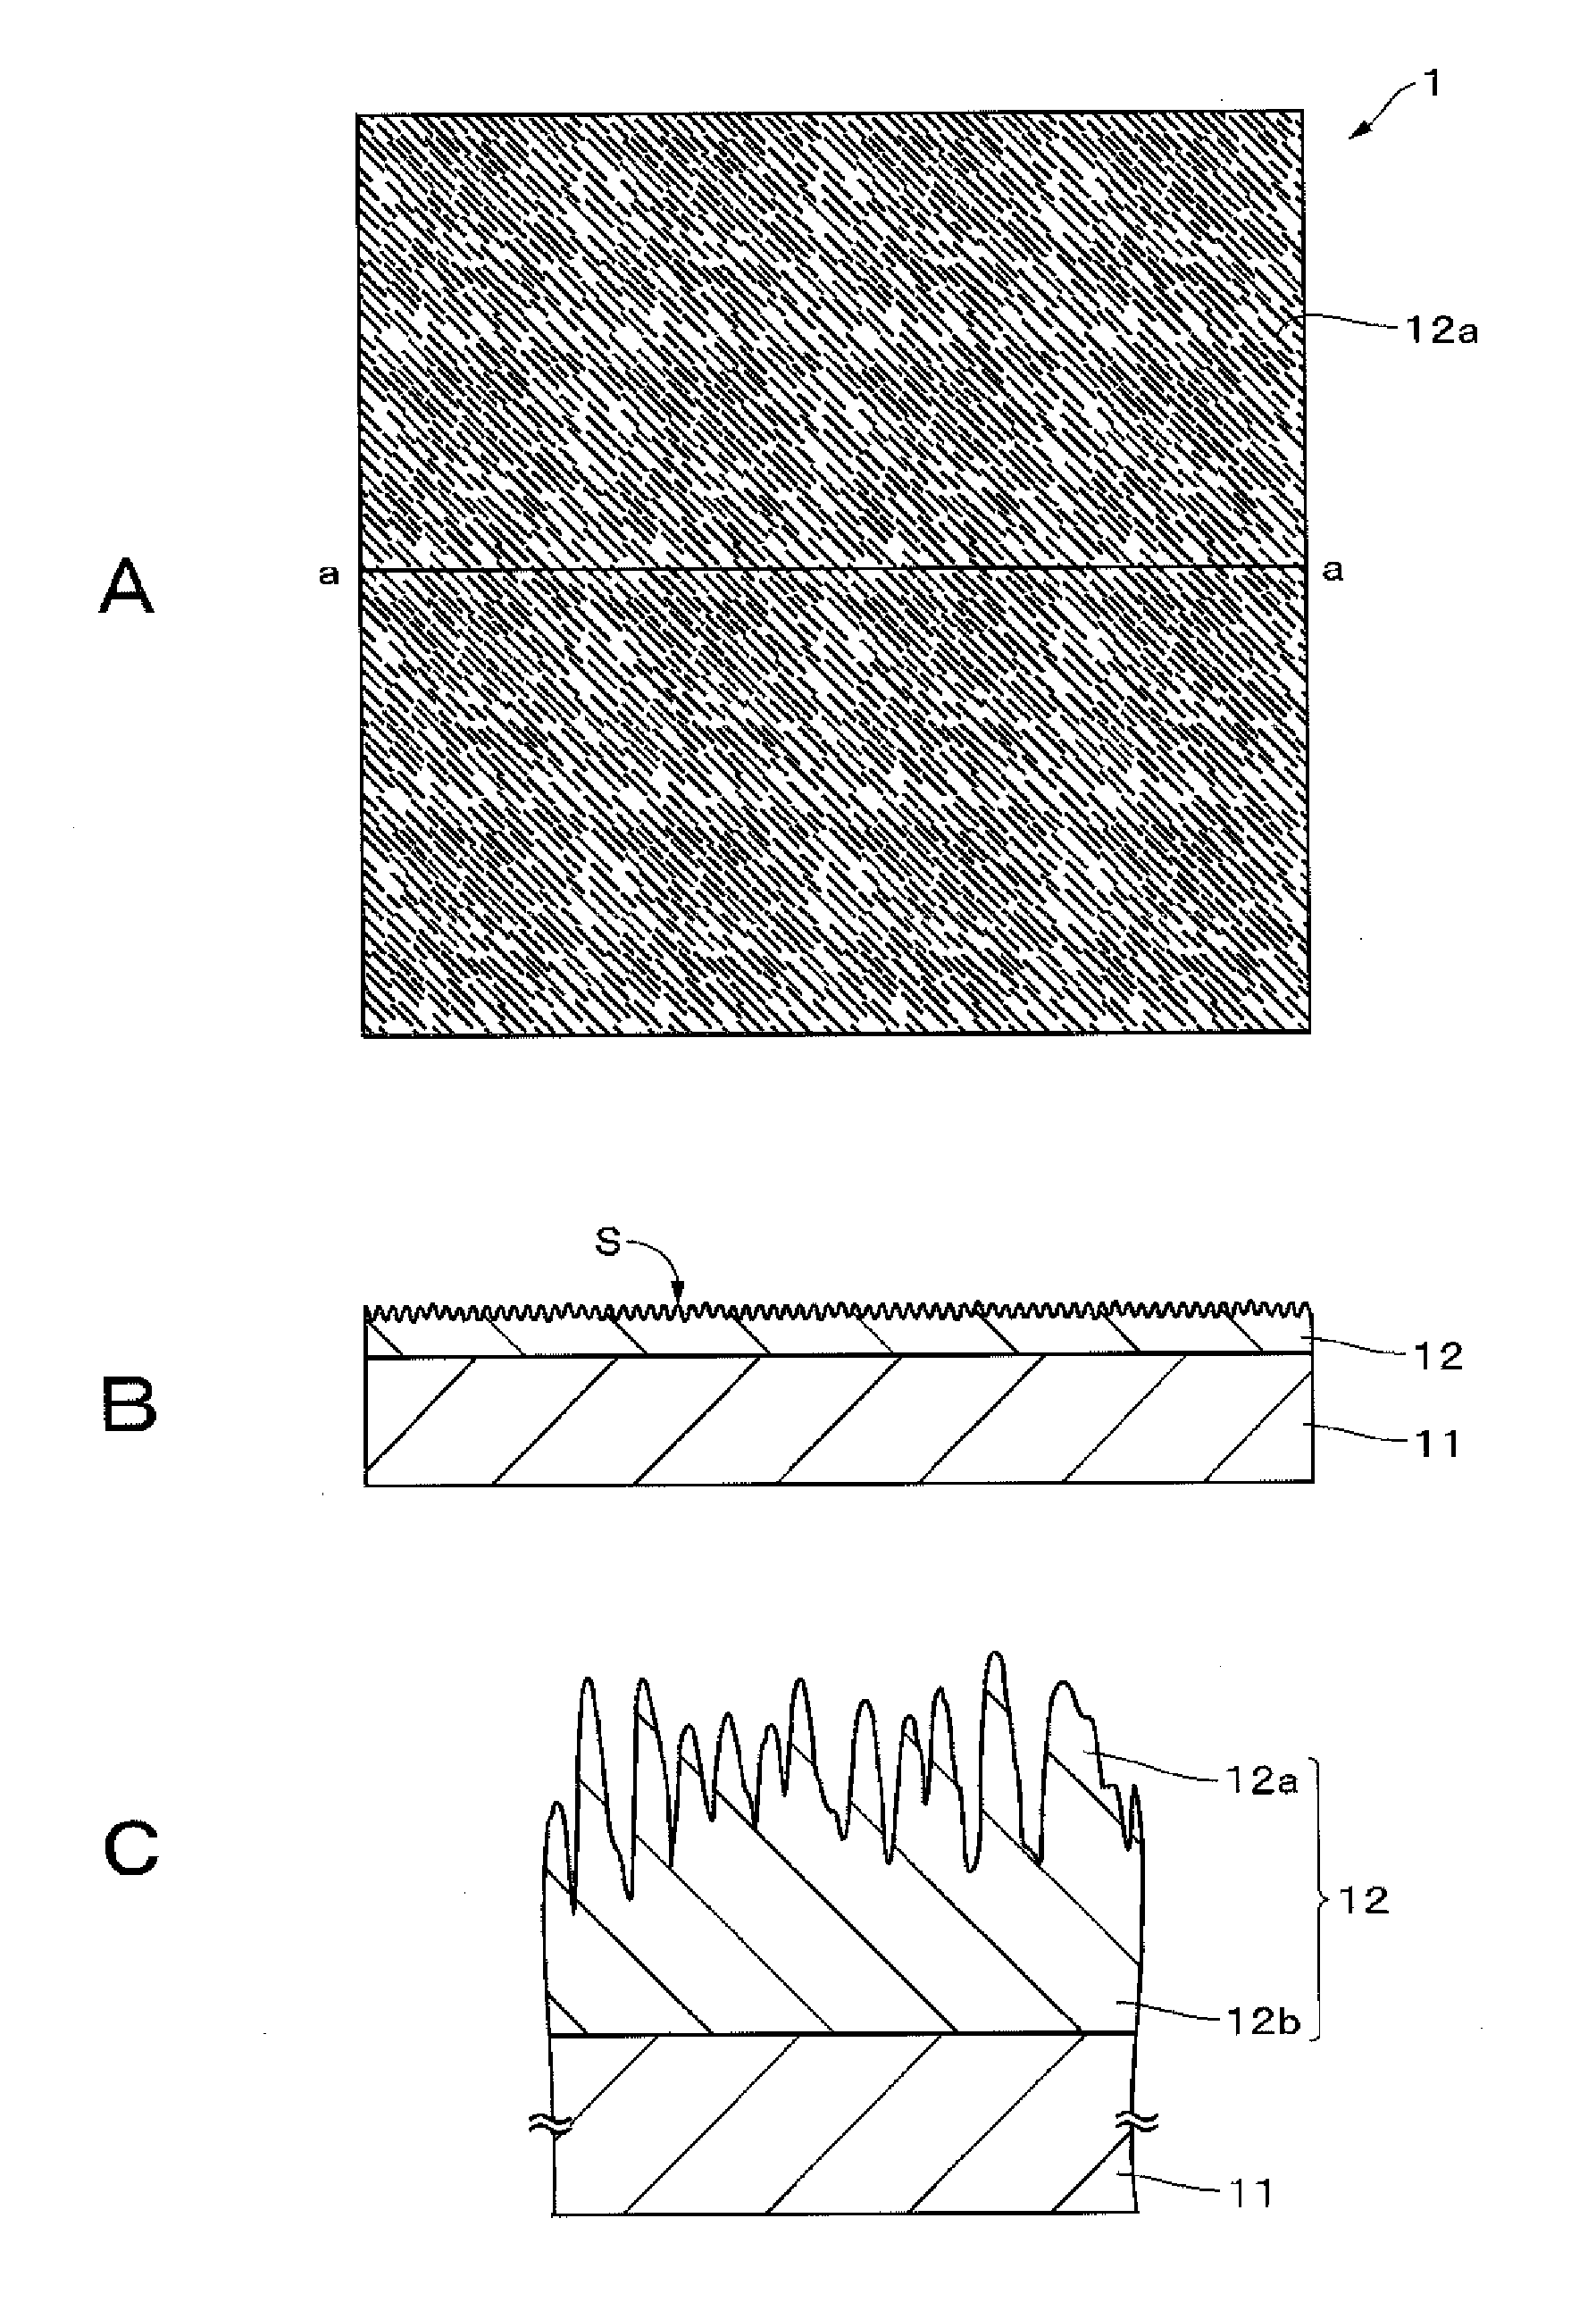 Anti-smudge body, display device, input device, and electronic device